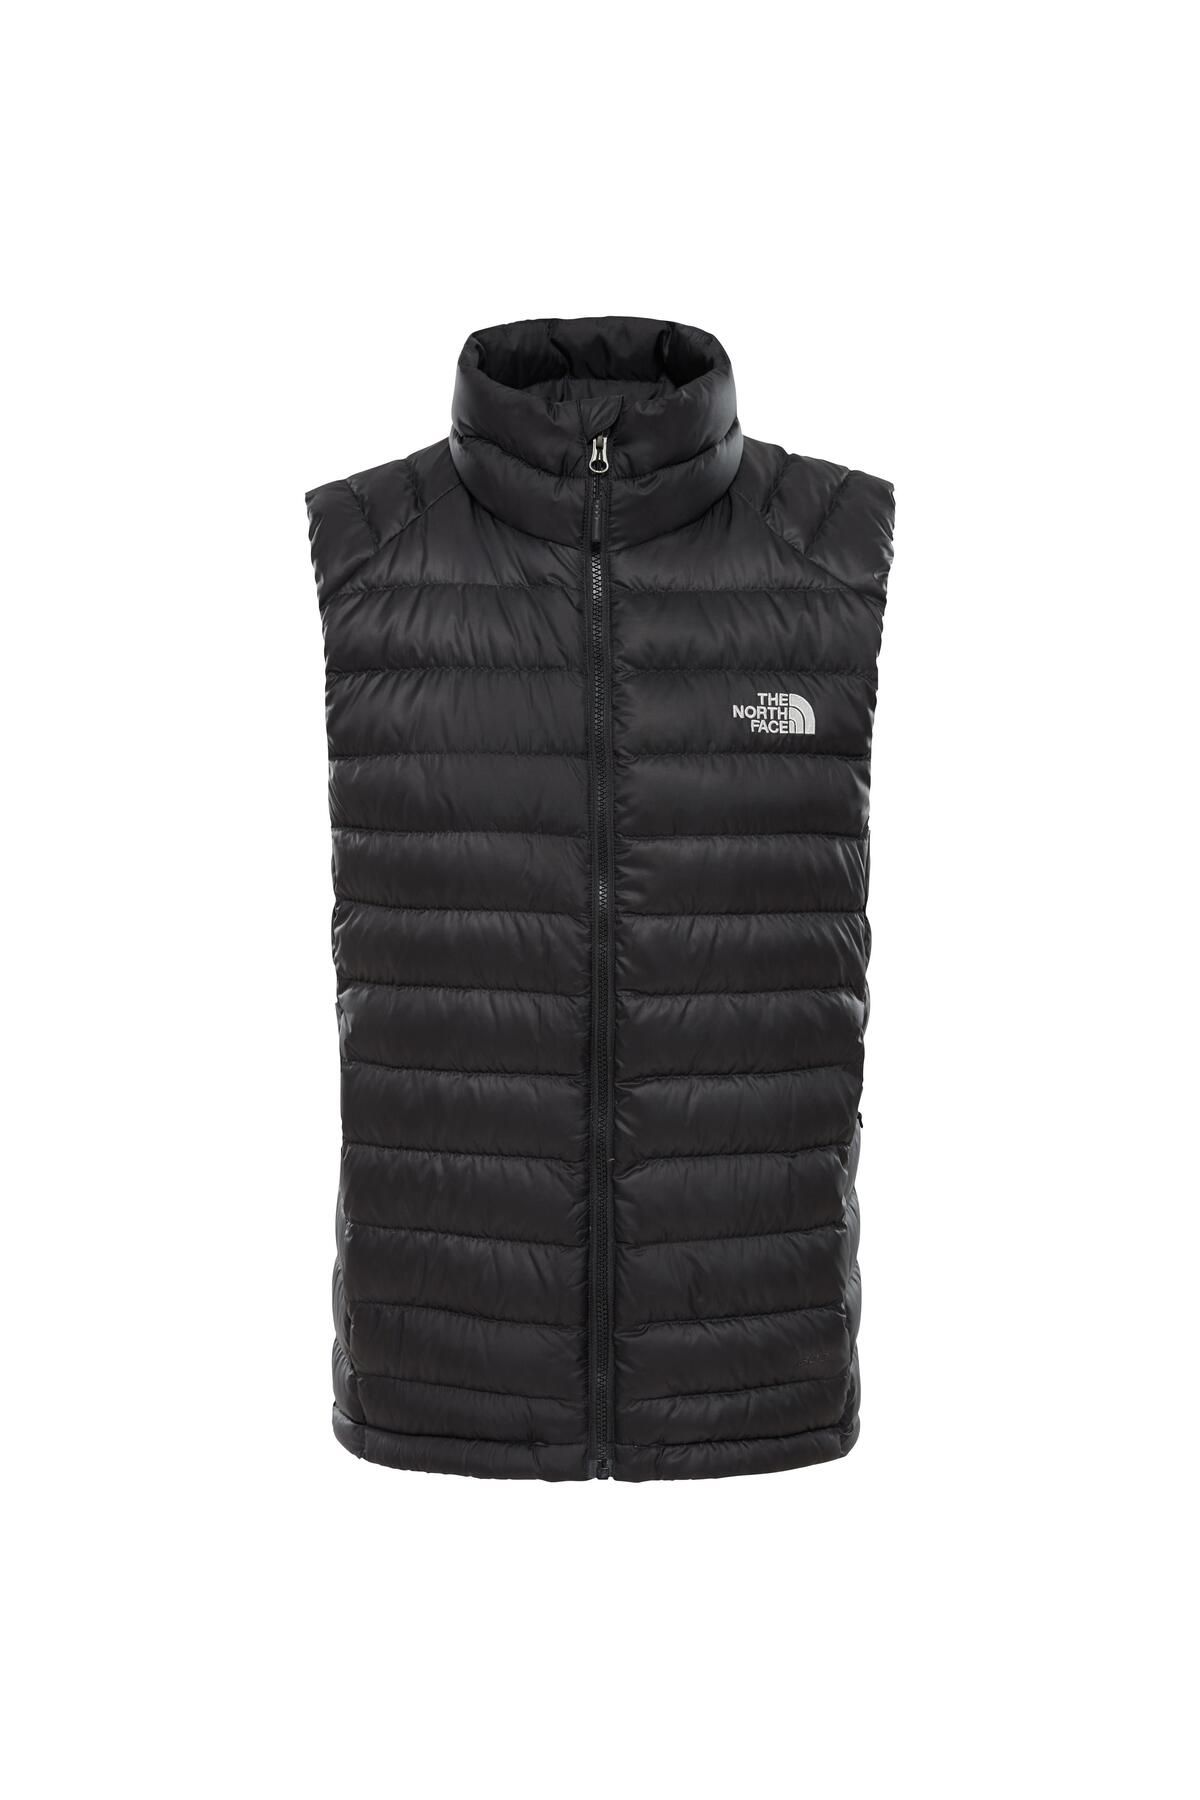 The North Face M TREVAIL VEST